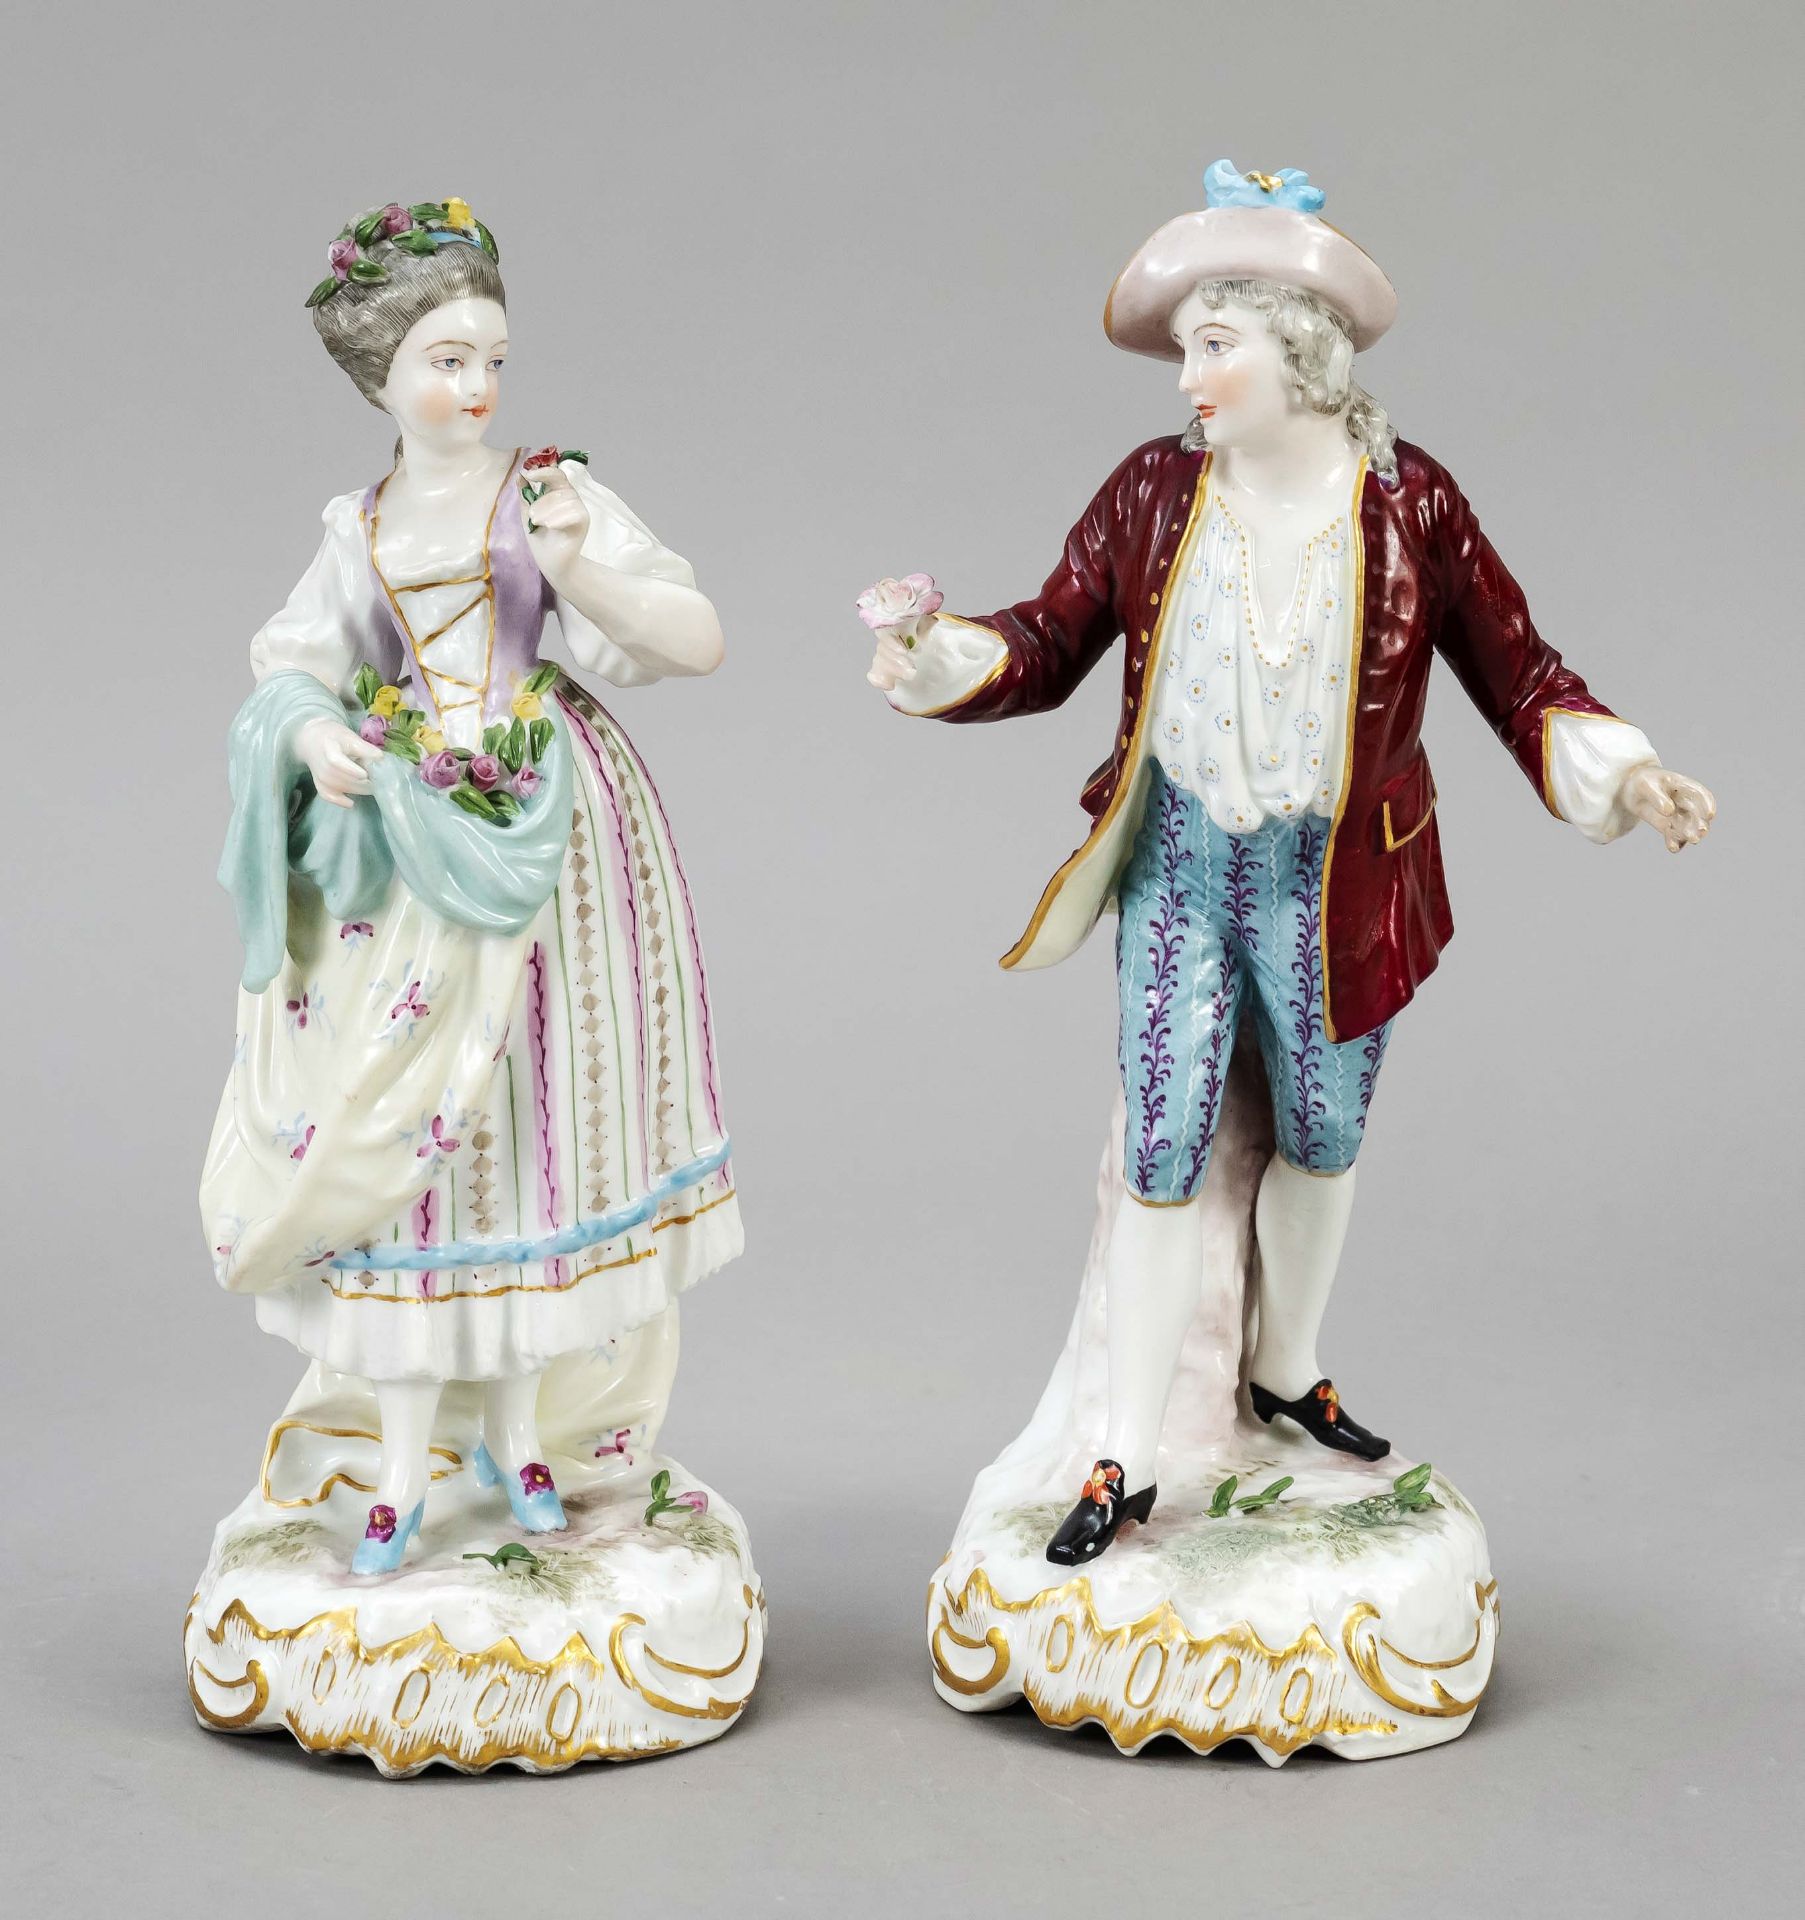 Pair of gardener figures, w. Paris, France, c. 1900, female gardener with flowers in her apron and